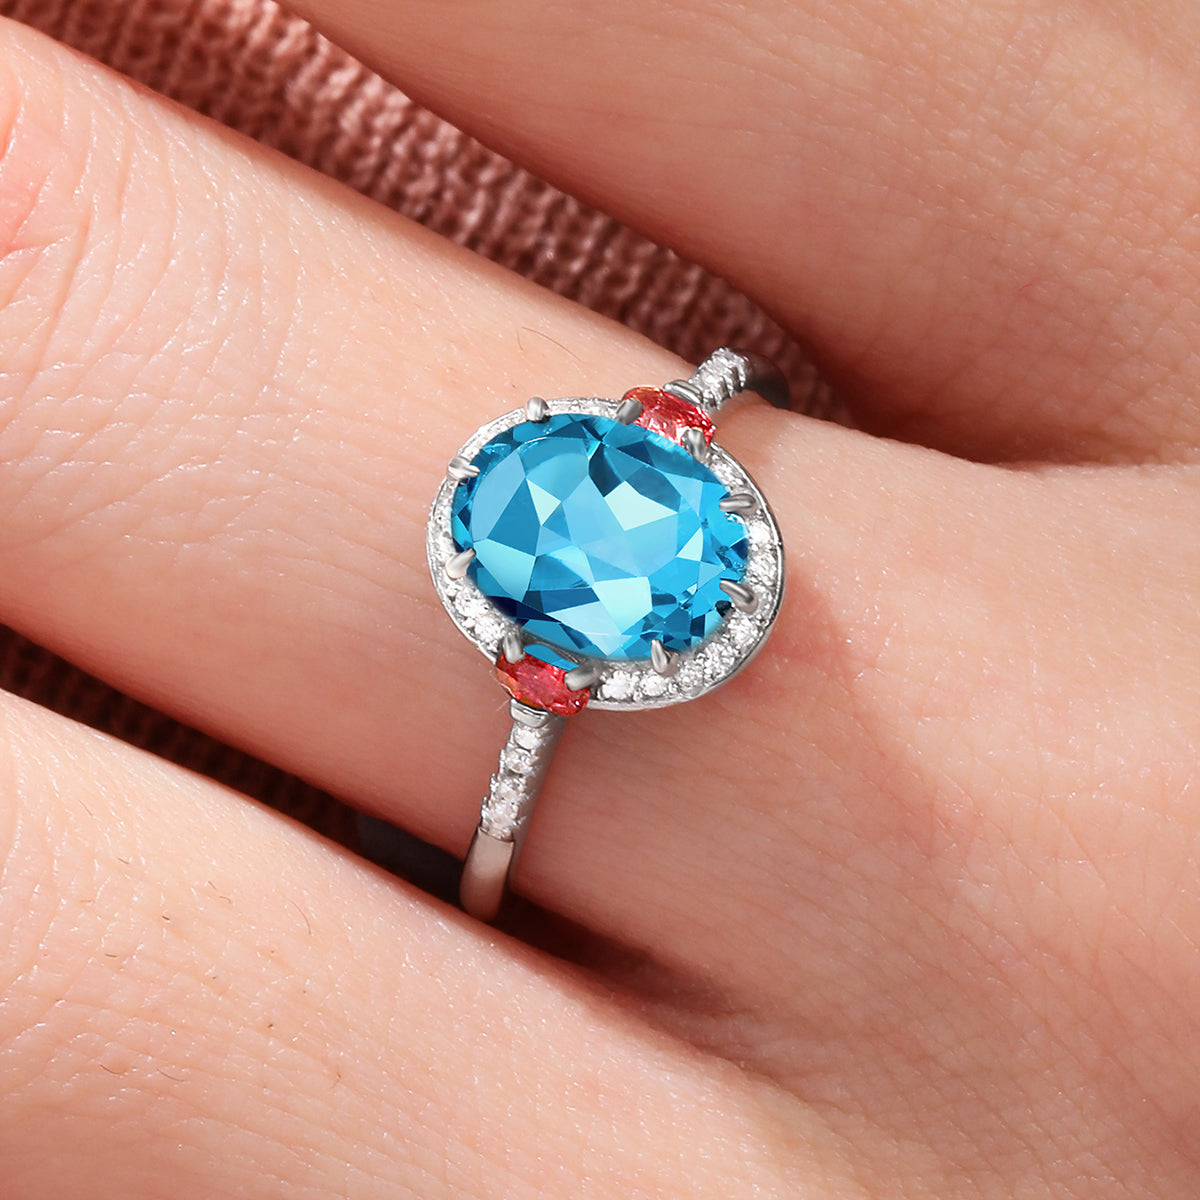 Fashion Light Luxury Shiny Simple Everything 925 Silver Inlaid Topaz London Blue Oval Ring